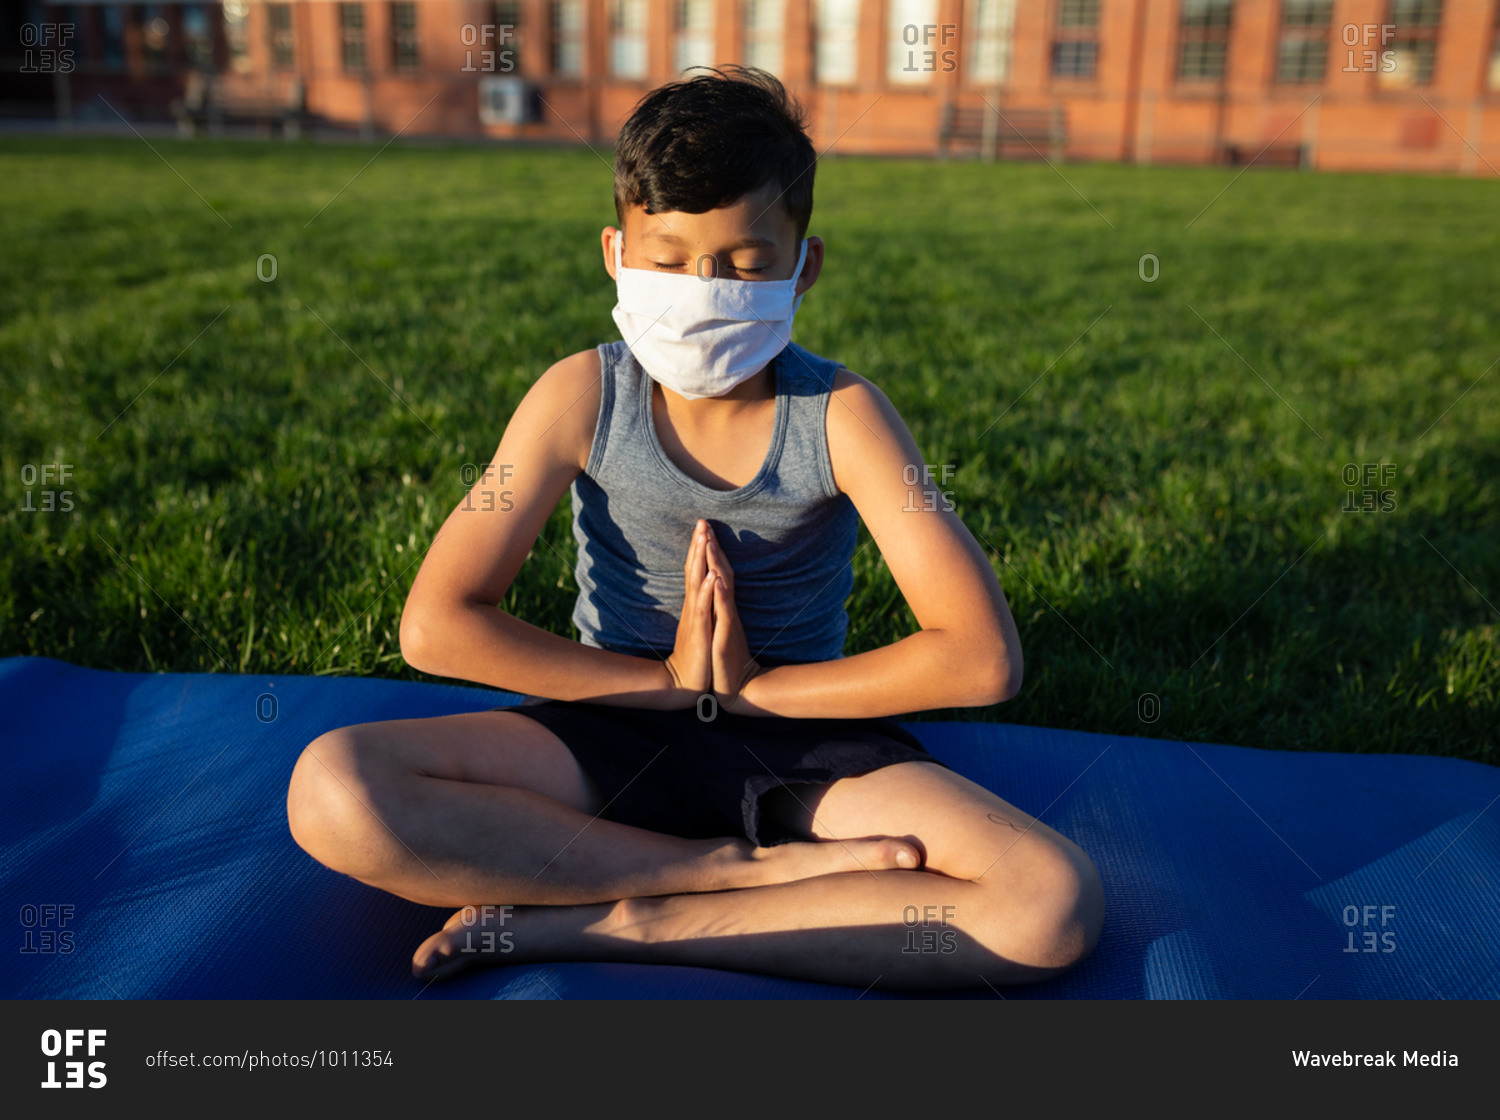 Mixed race boy wearing face mask performing yoga in the school garden. Primary education social distancing health safety during Covid19 Coronavirus pandemic.